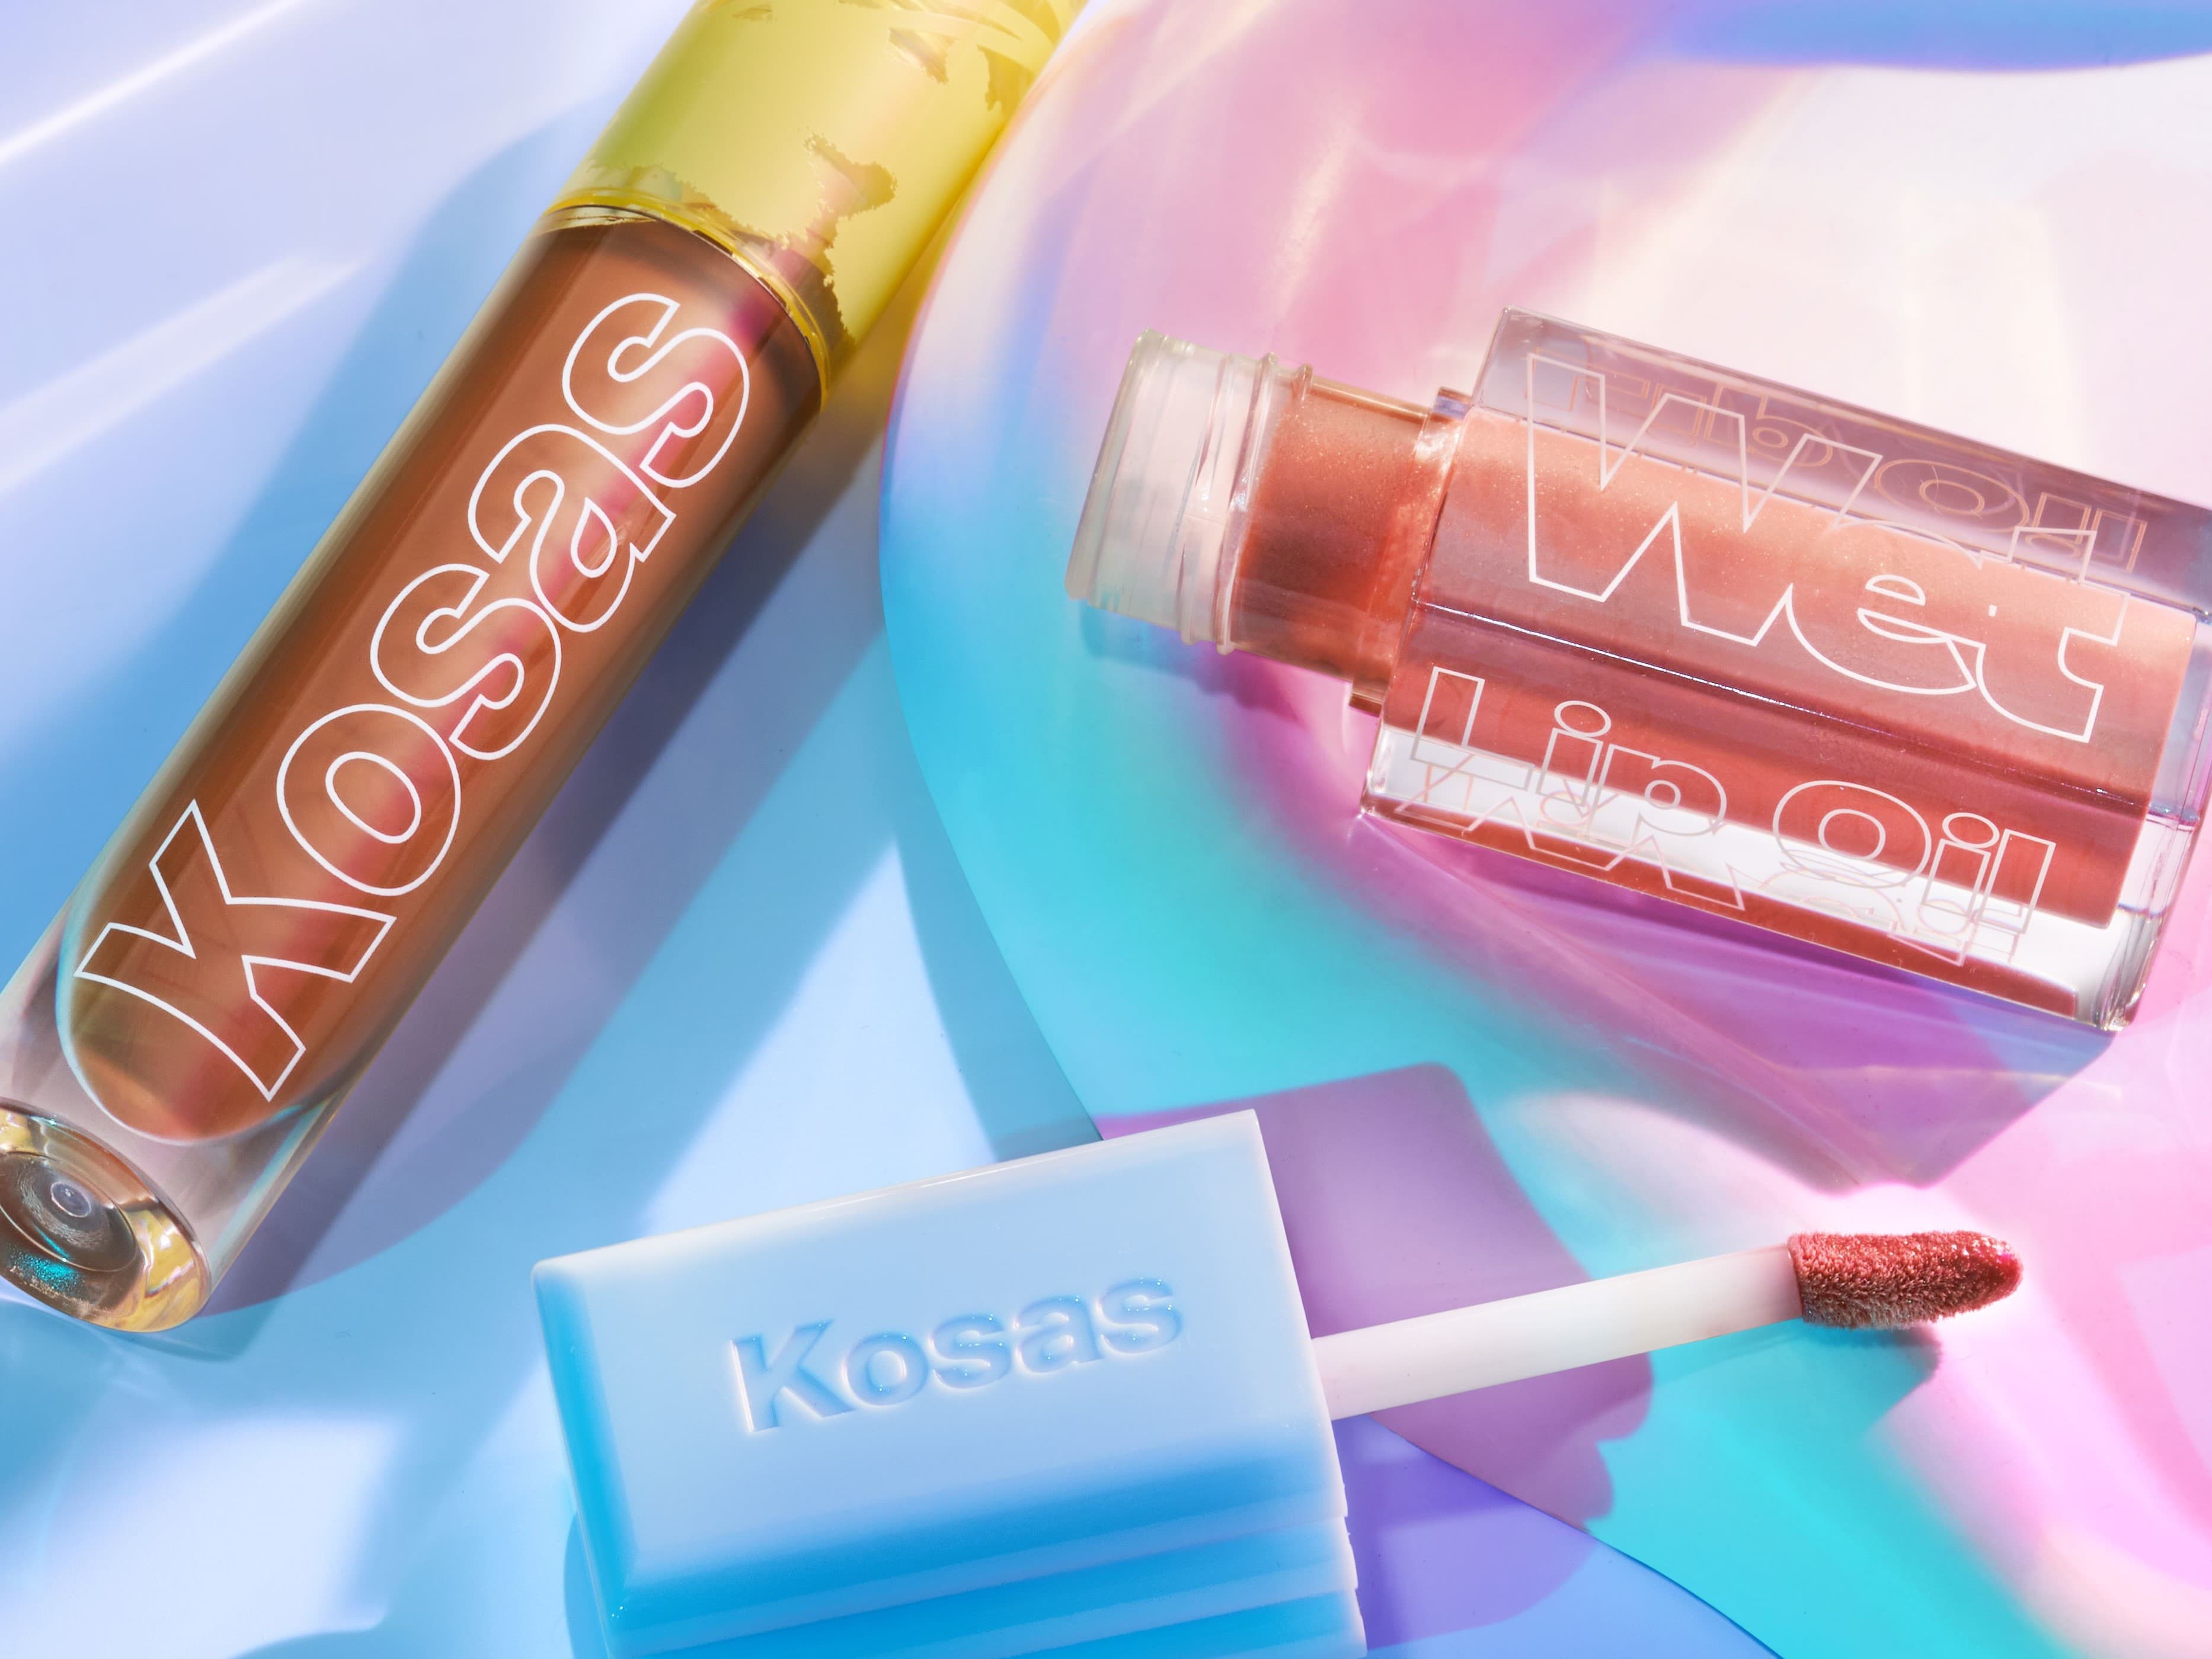 Best Kosas products | Space NK